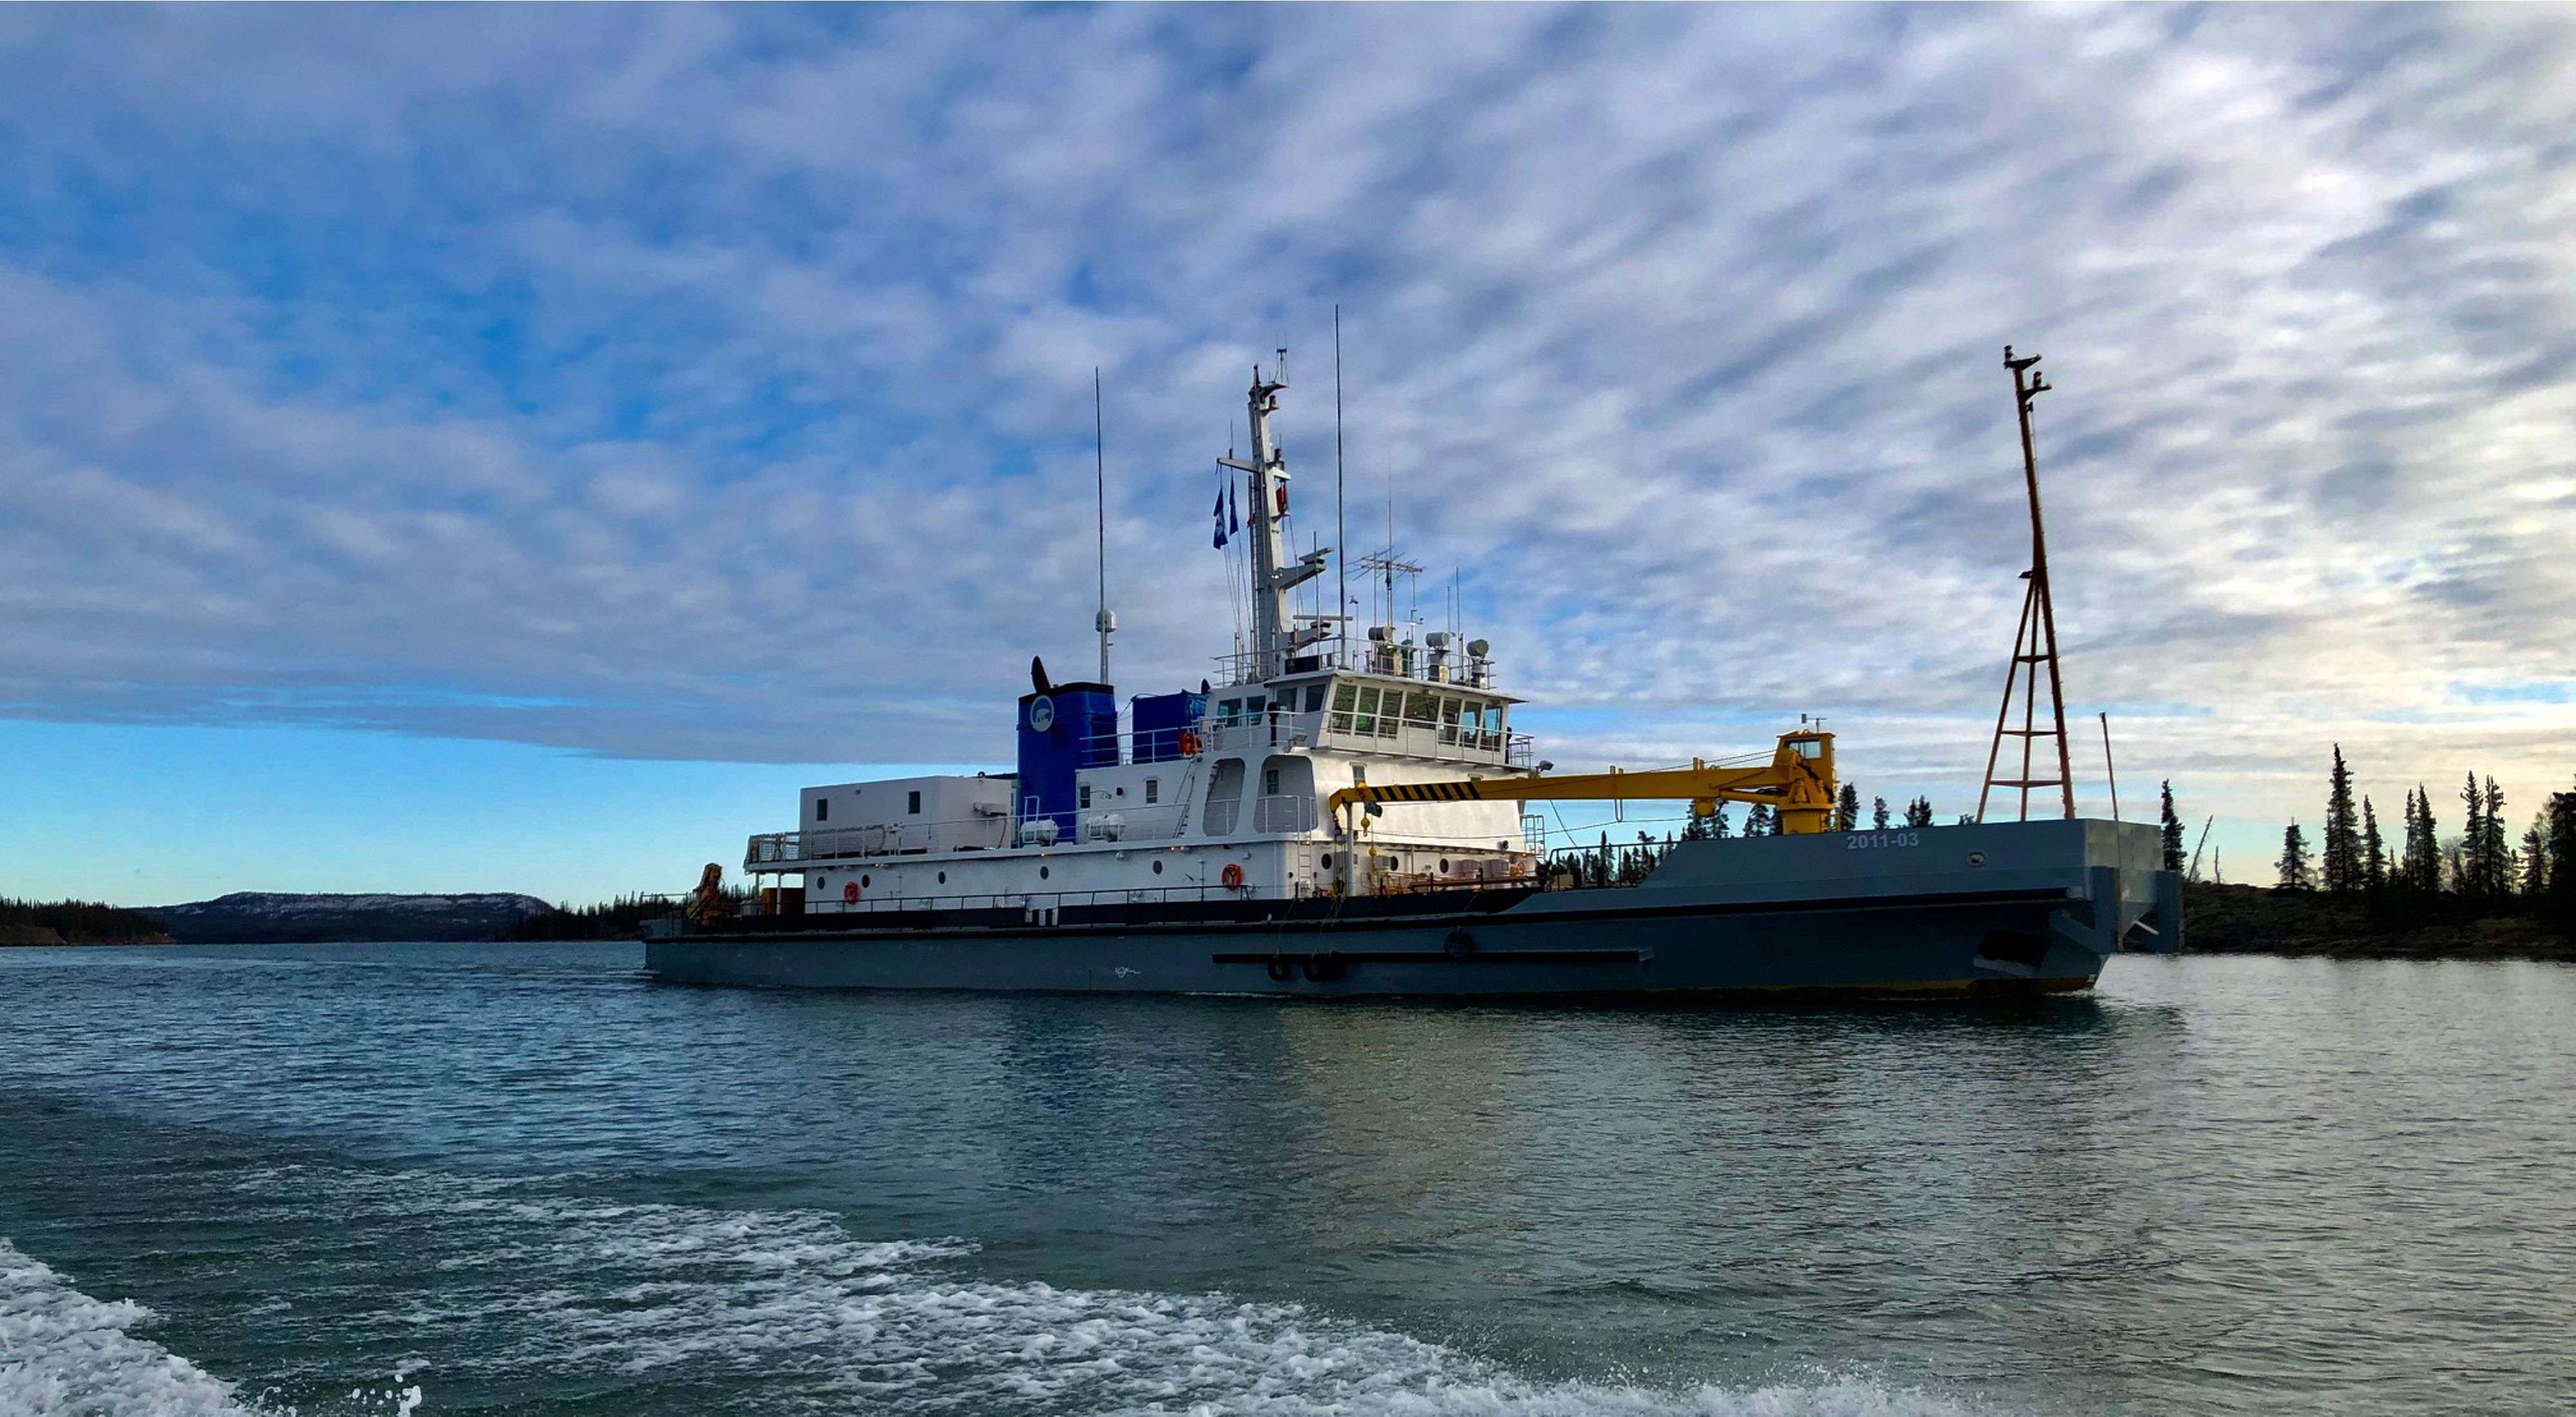 In October 2019, a research vessel set sail on Tu Nedhé (also known as Great Slave Lake) with a crew that included young people from the nearby Łutsël K’é Dene First Nation.